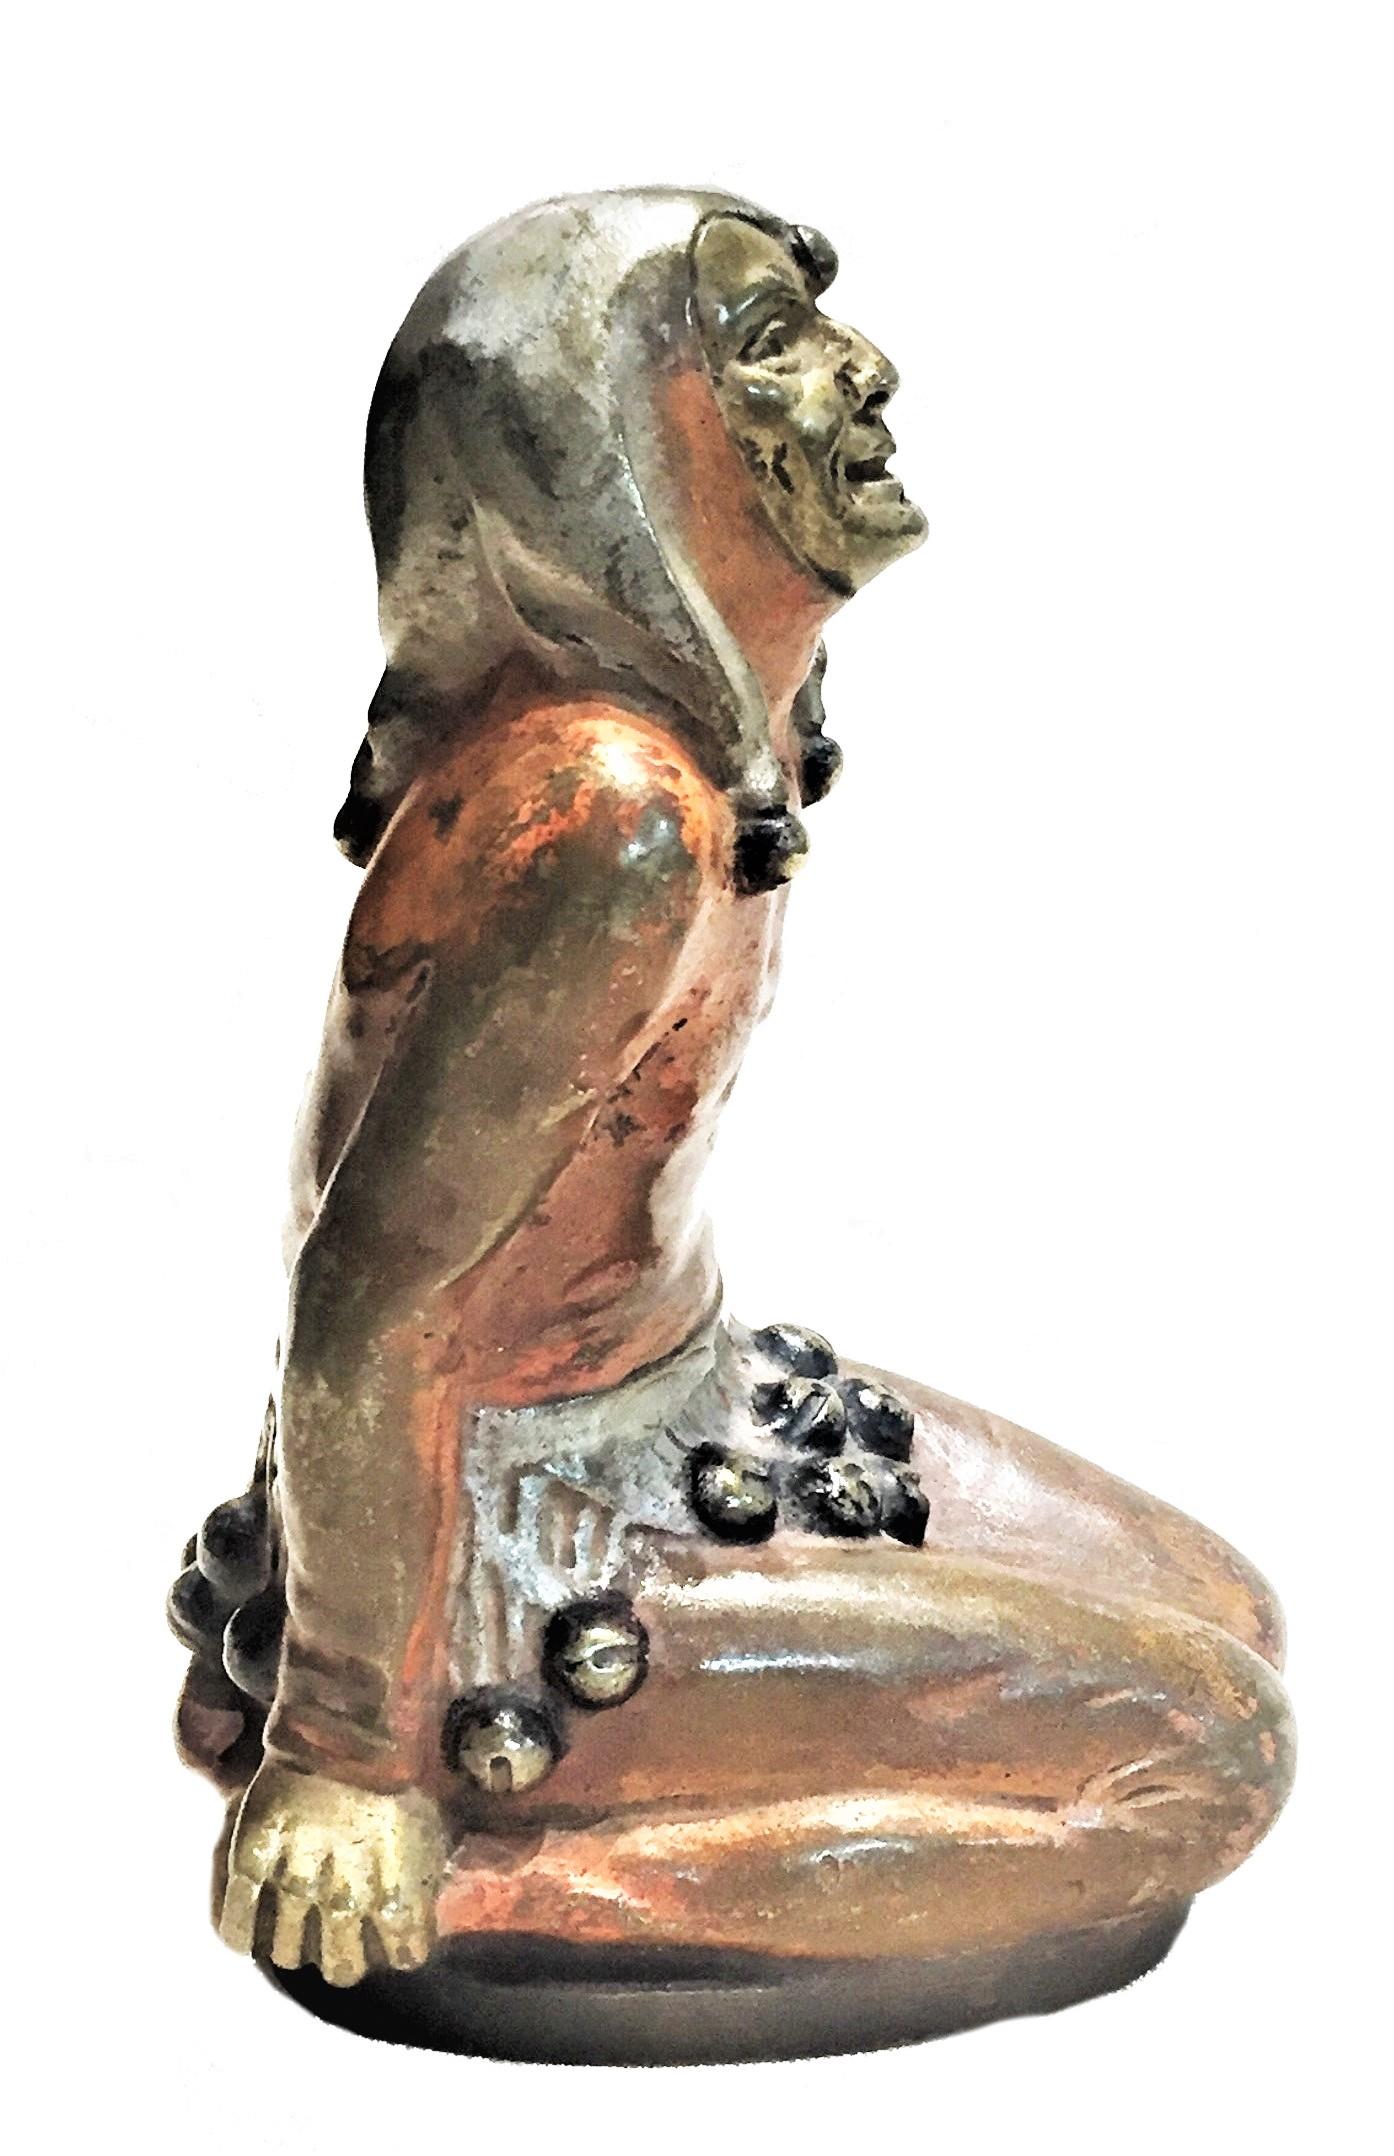 Dimensions: 4.33 high x 2.25 wide x 2.75 deep

This elegant desk-size statuette of a kneeled harlequin wearing a golden mask is a perfect example of the little masterpieces in cold-painted bronze, created in Vienna around 1900; during the